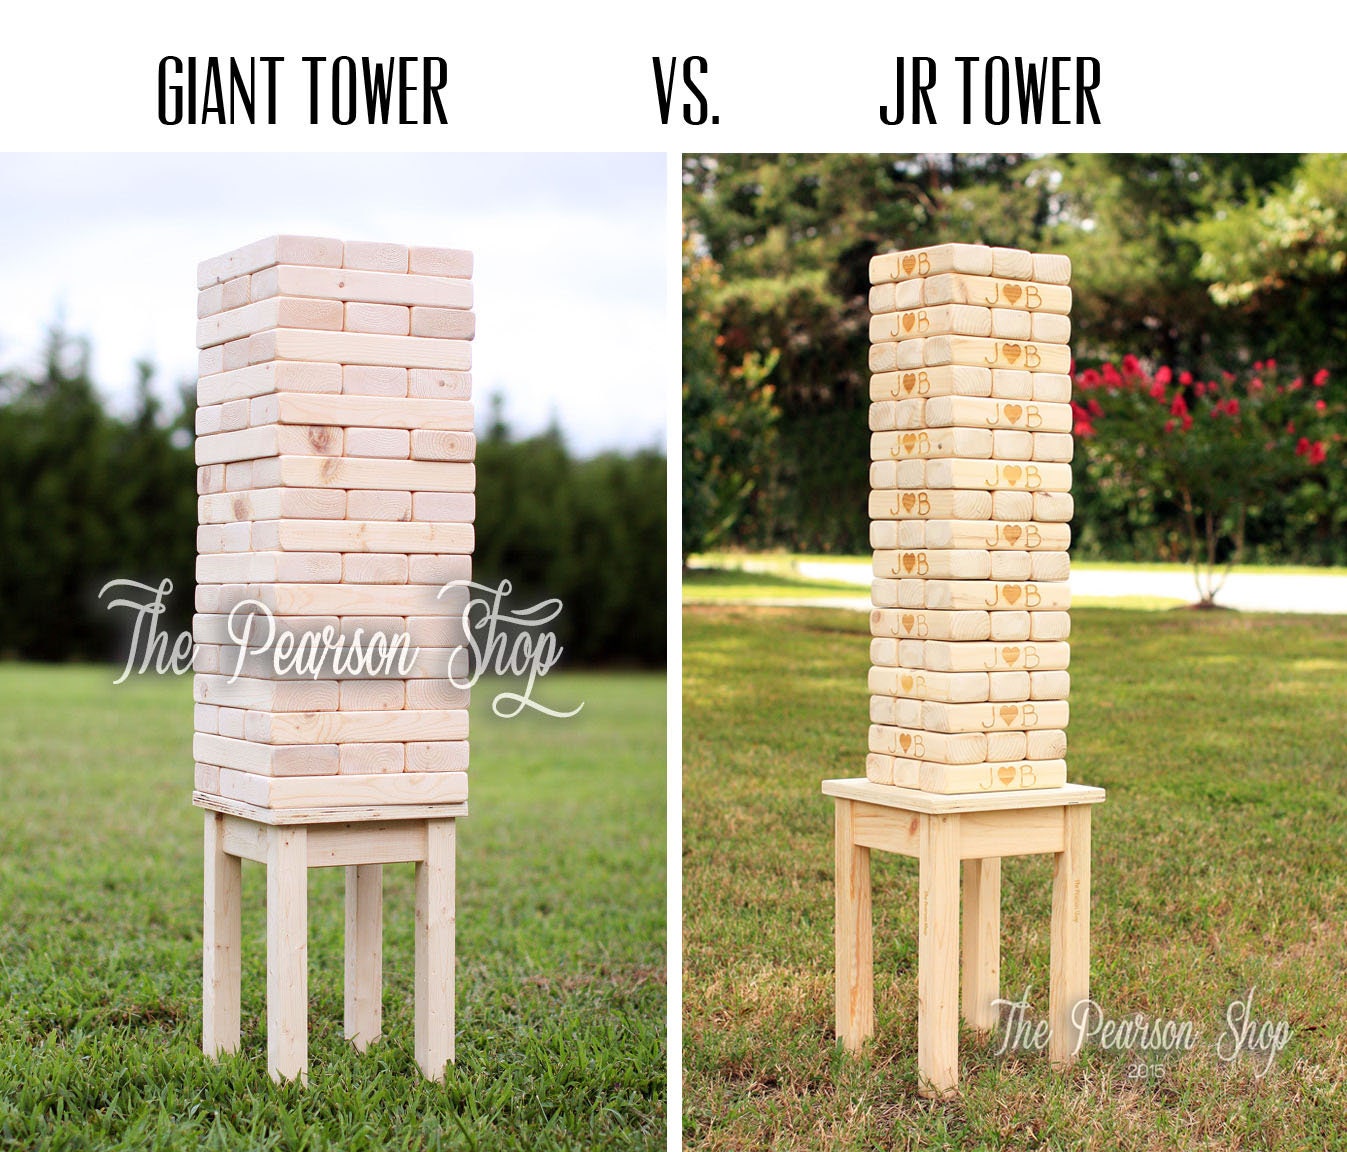 Table for Giant Tower Games